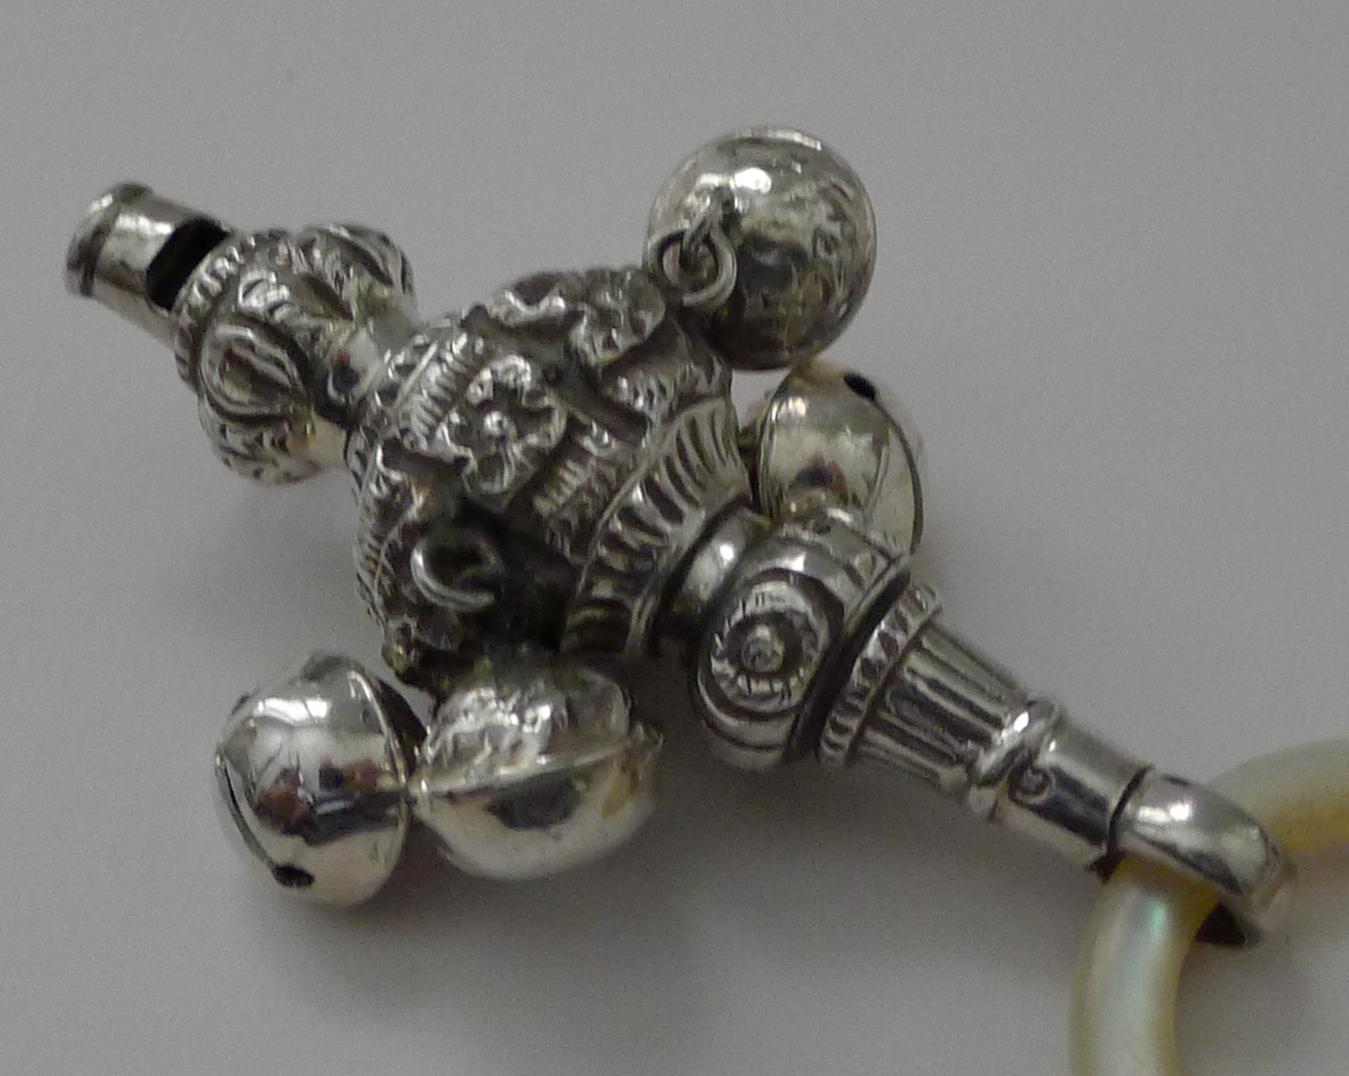 A charming example of a sterling silver baby rattle complete with working whistle and an iridescent Mother of Pearl teething ring.

The rattle has four bells and everything in great condition, these make the most wonderful heirloom gifts for the new